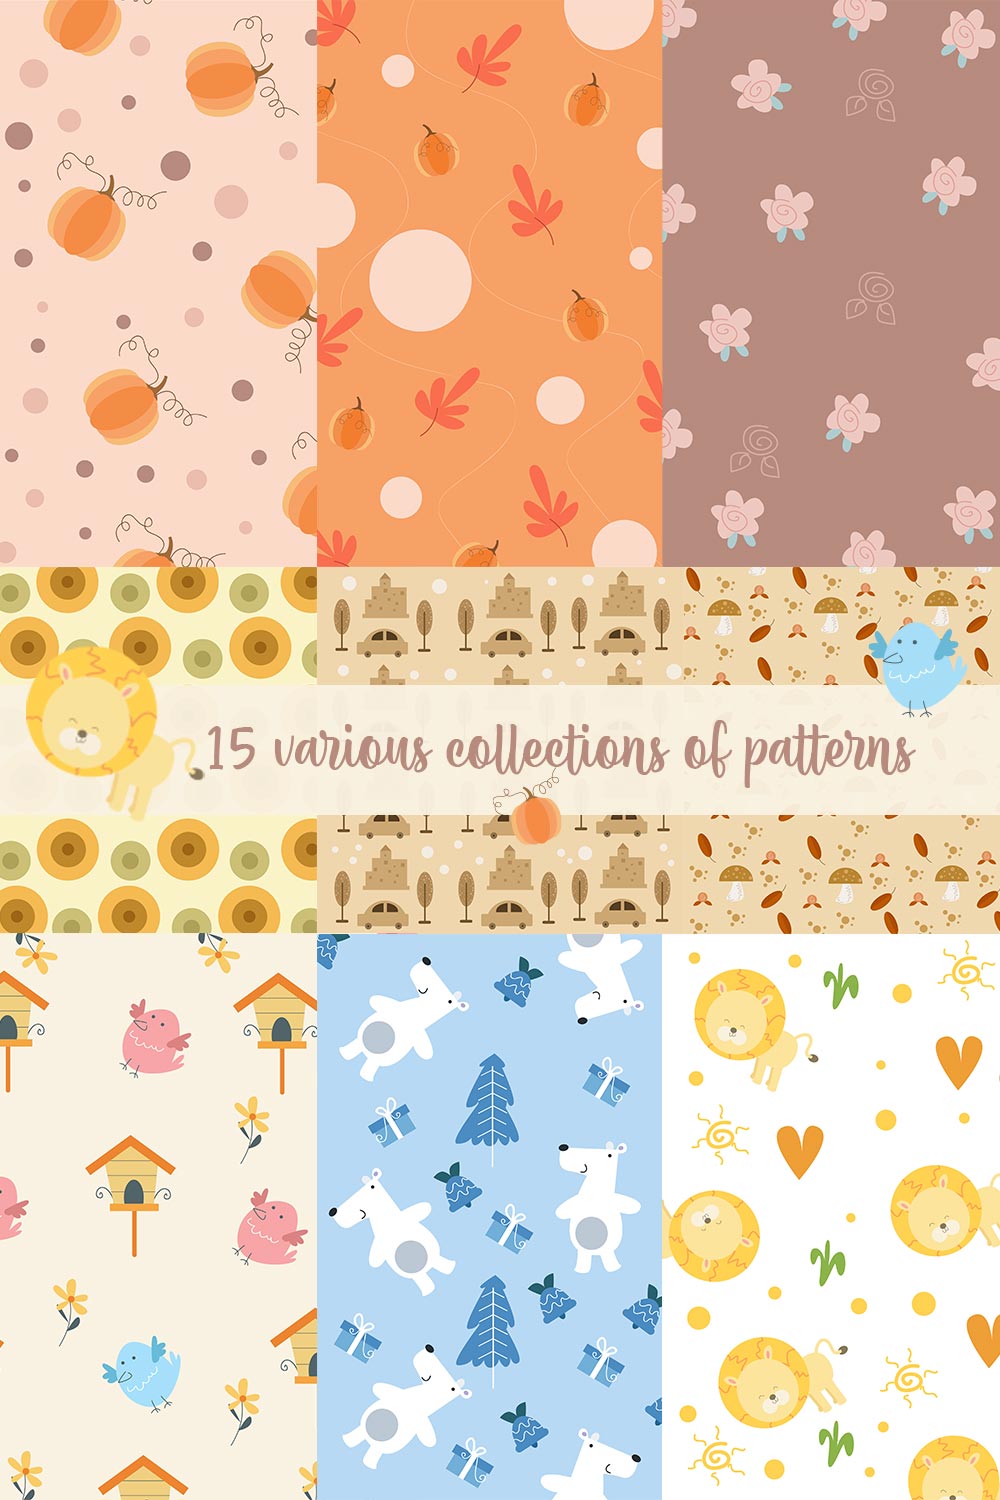 Illustration vector graphic of 15 various collections of patterns pinterest image.